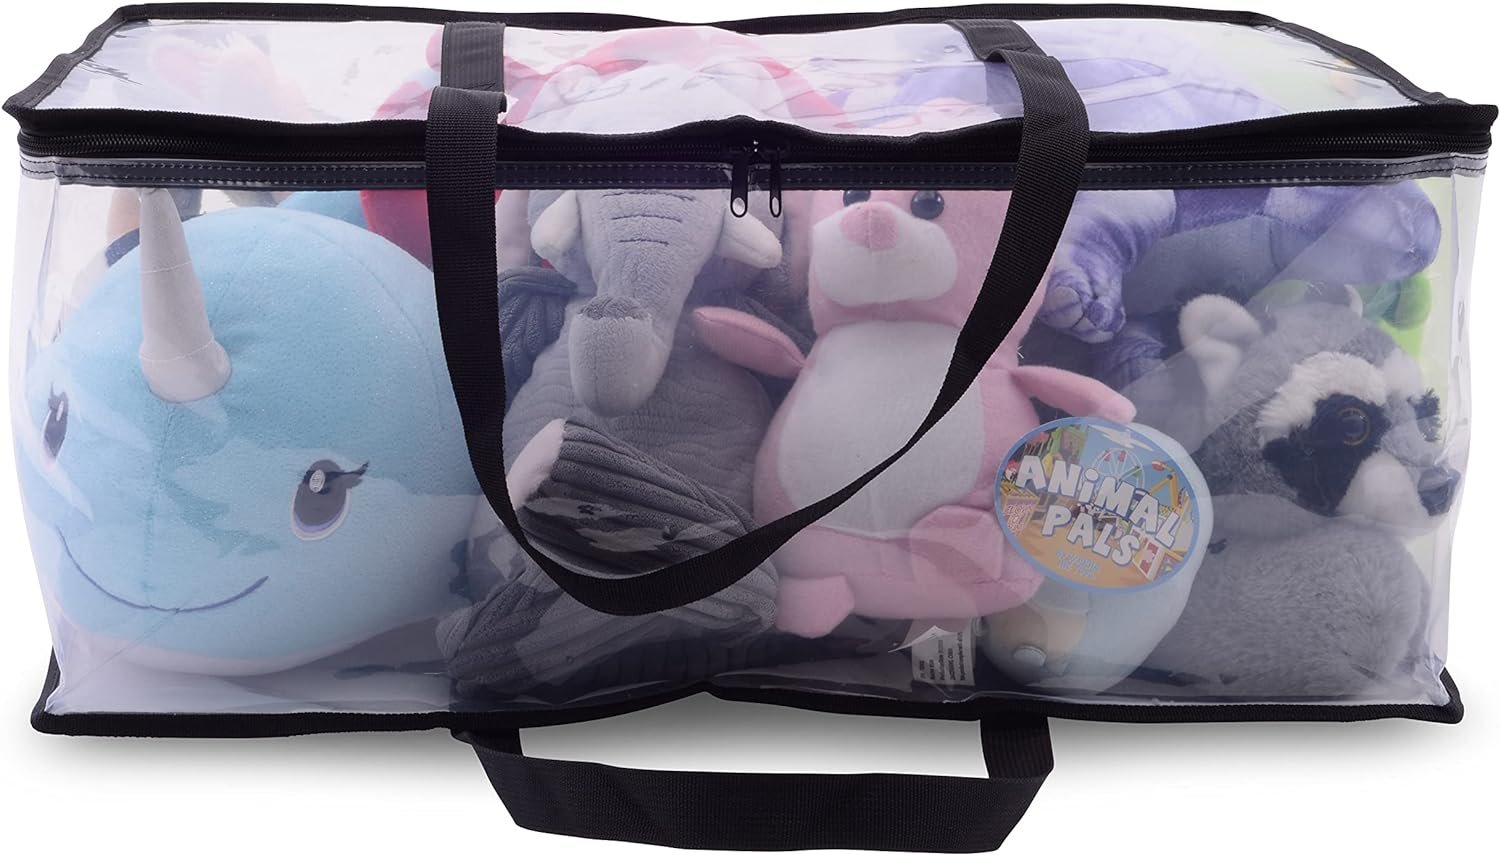 Clear Storage Bags Review